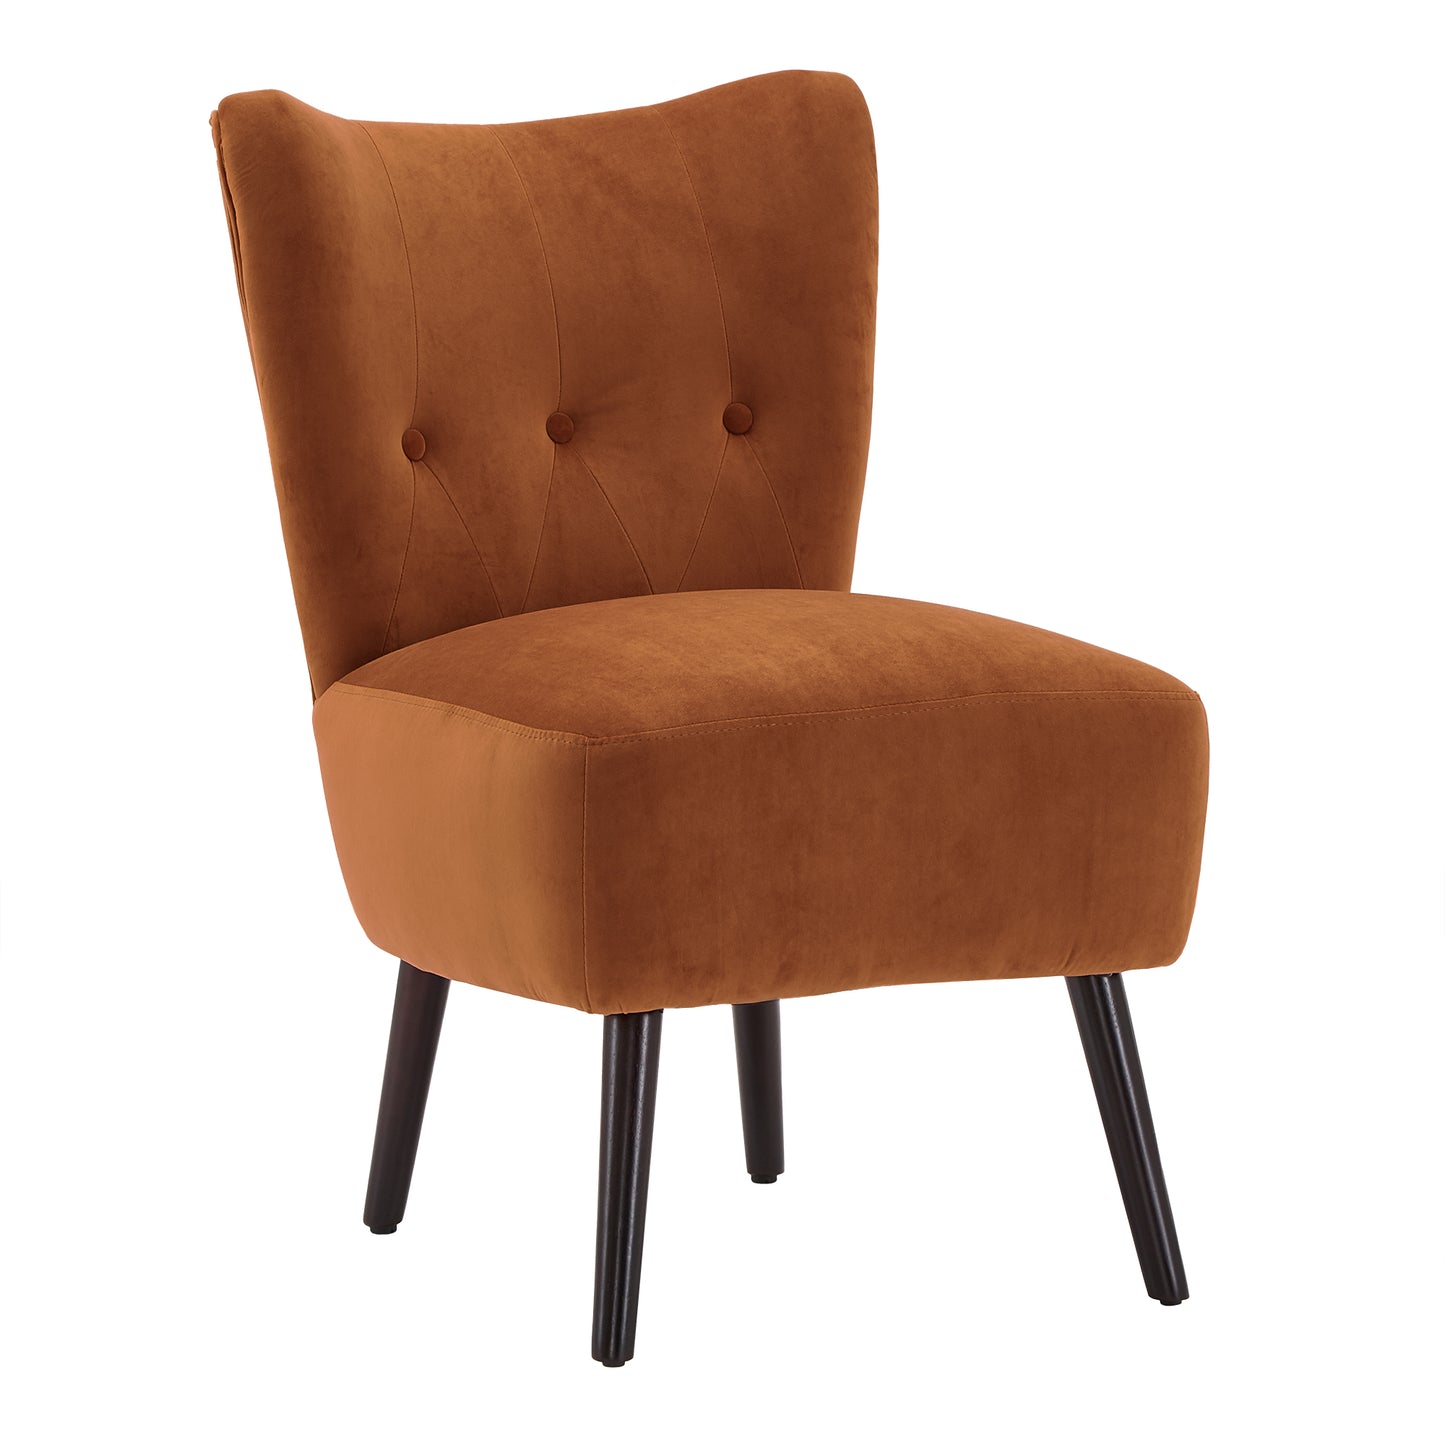 22.5" Wide Tufted Accent Chair - Orange Velvet with Brown Legs